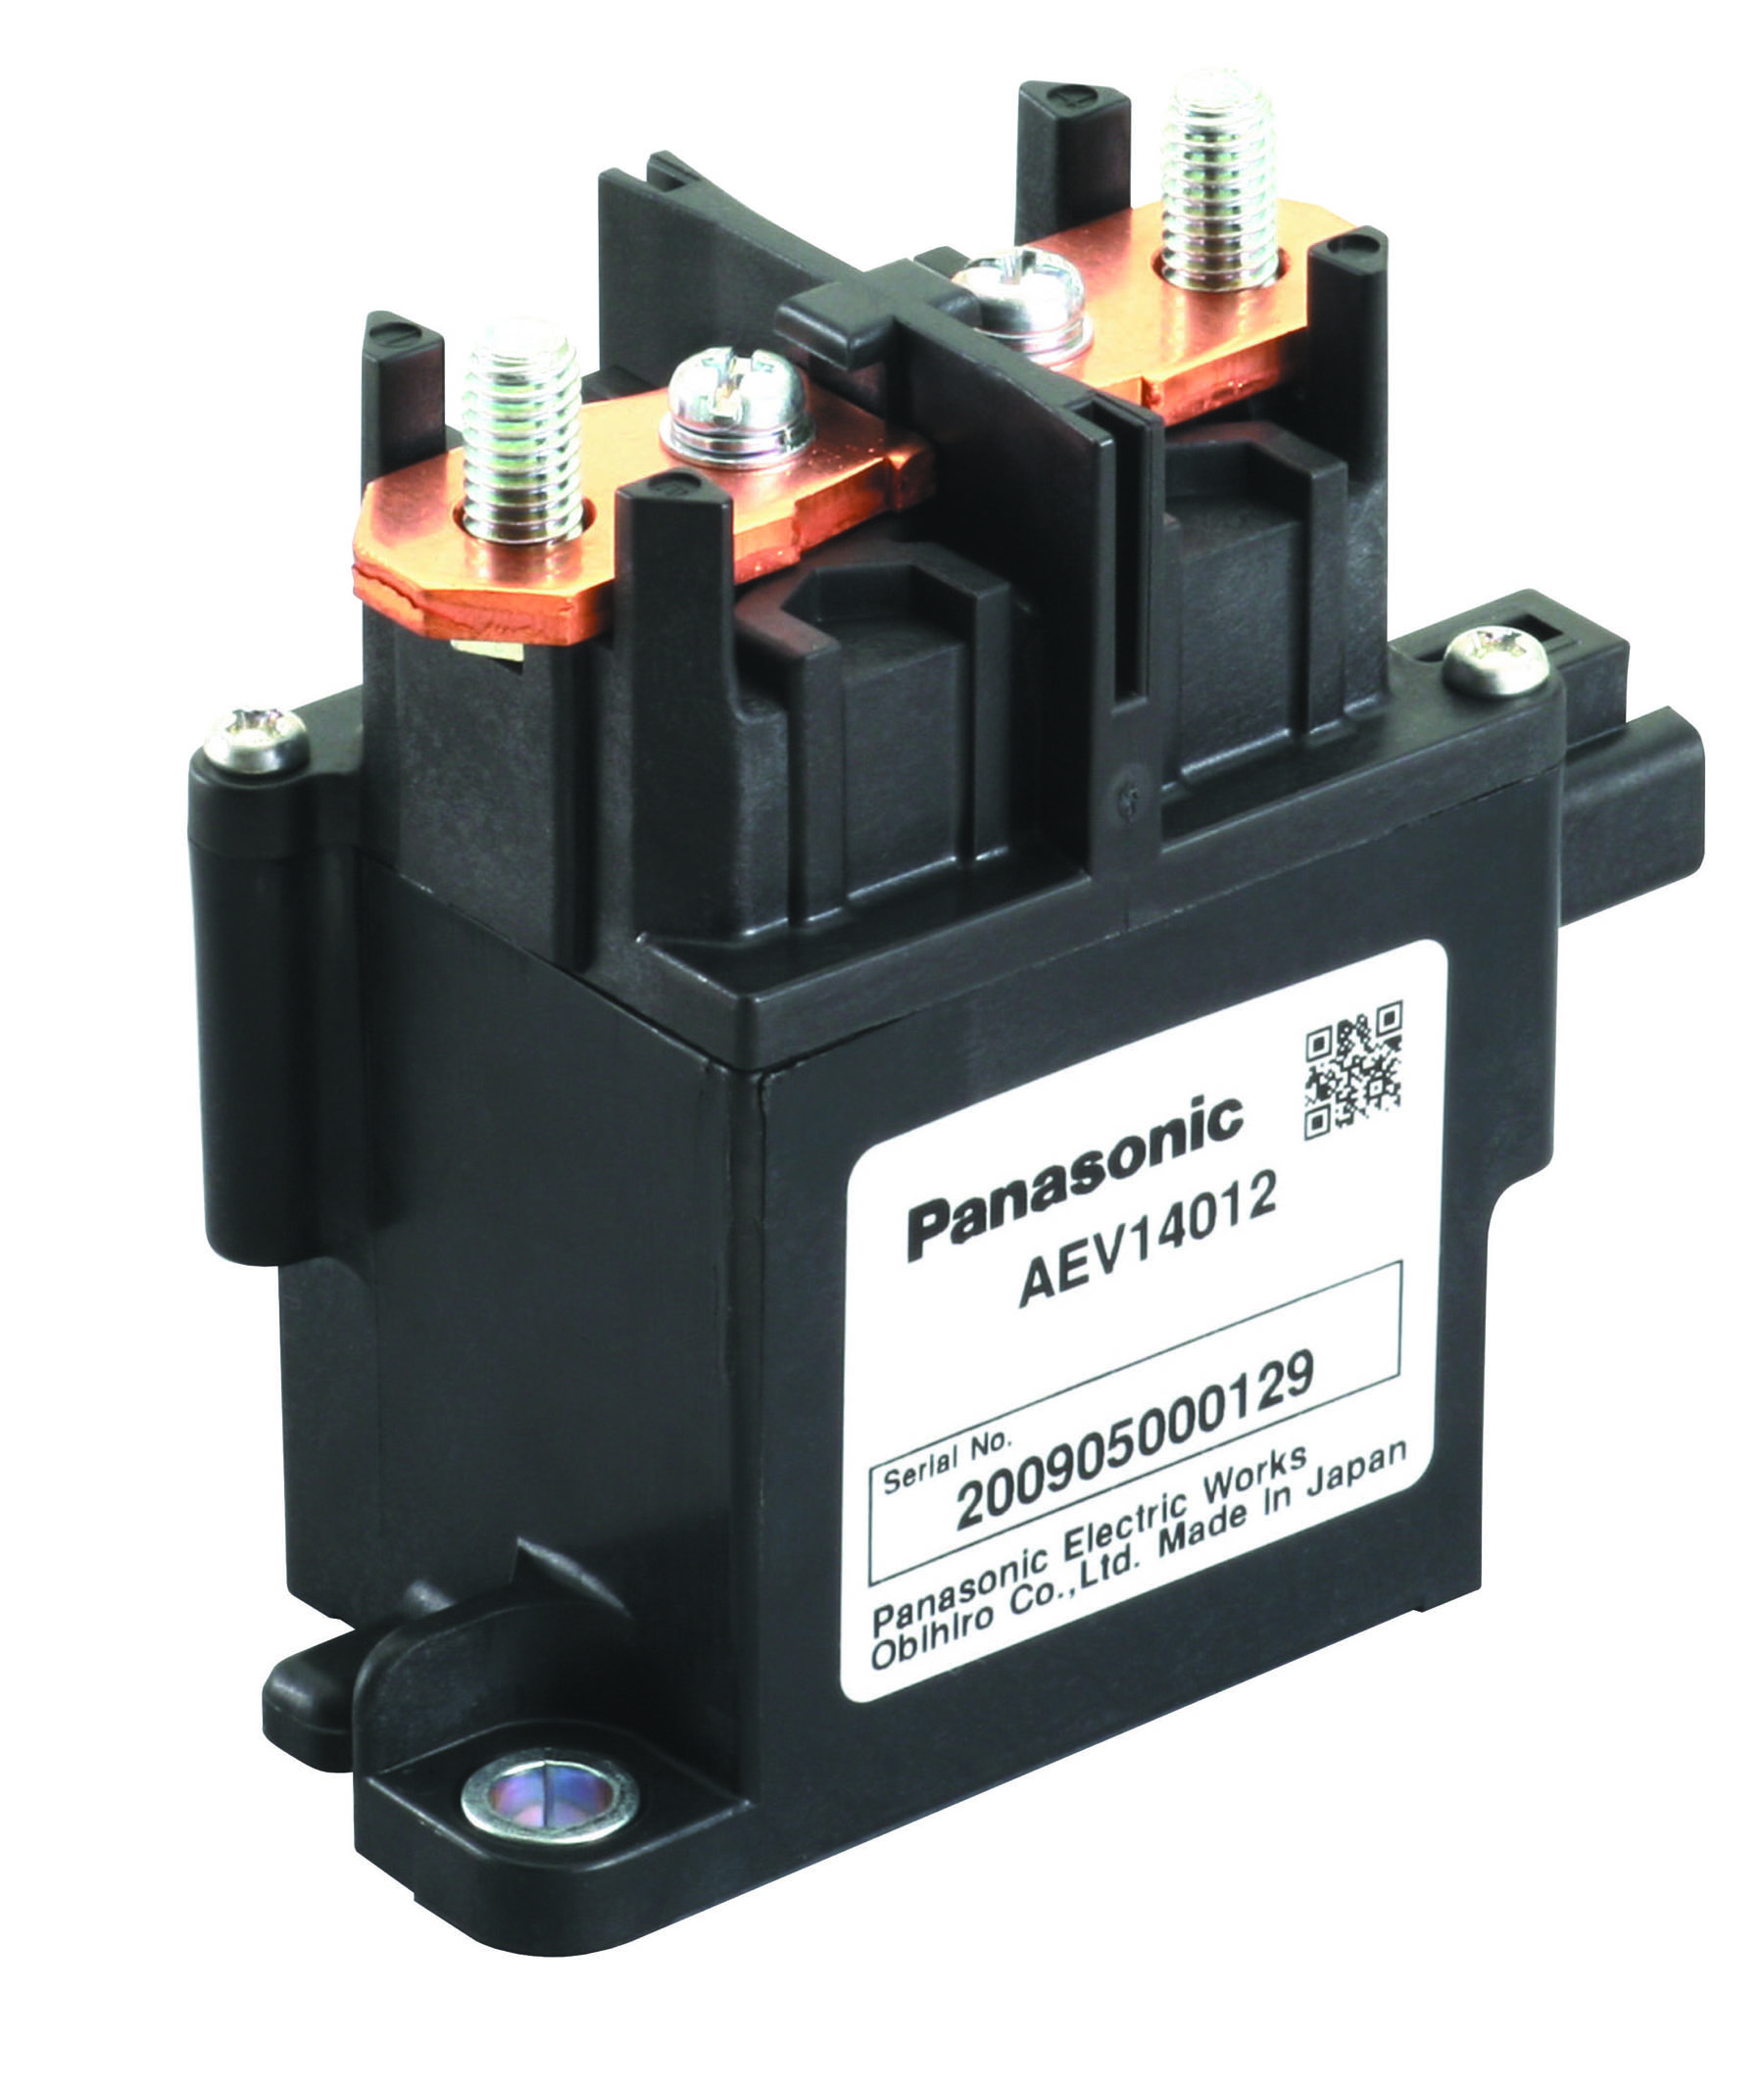 Panasonic's electric vehicle relays for DC switching in powertrain apps now at TTI 